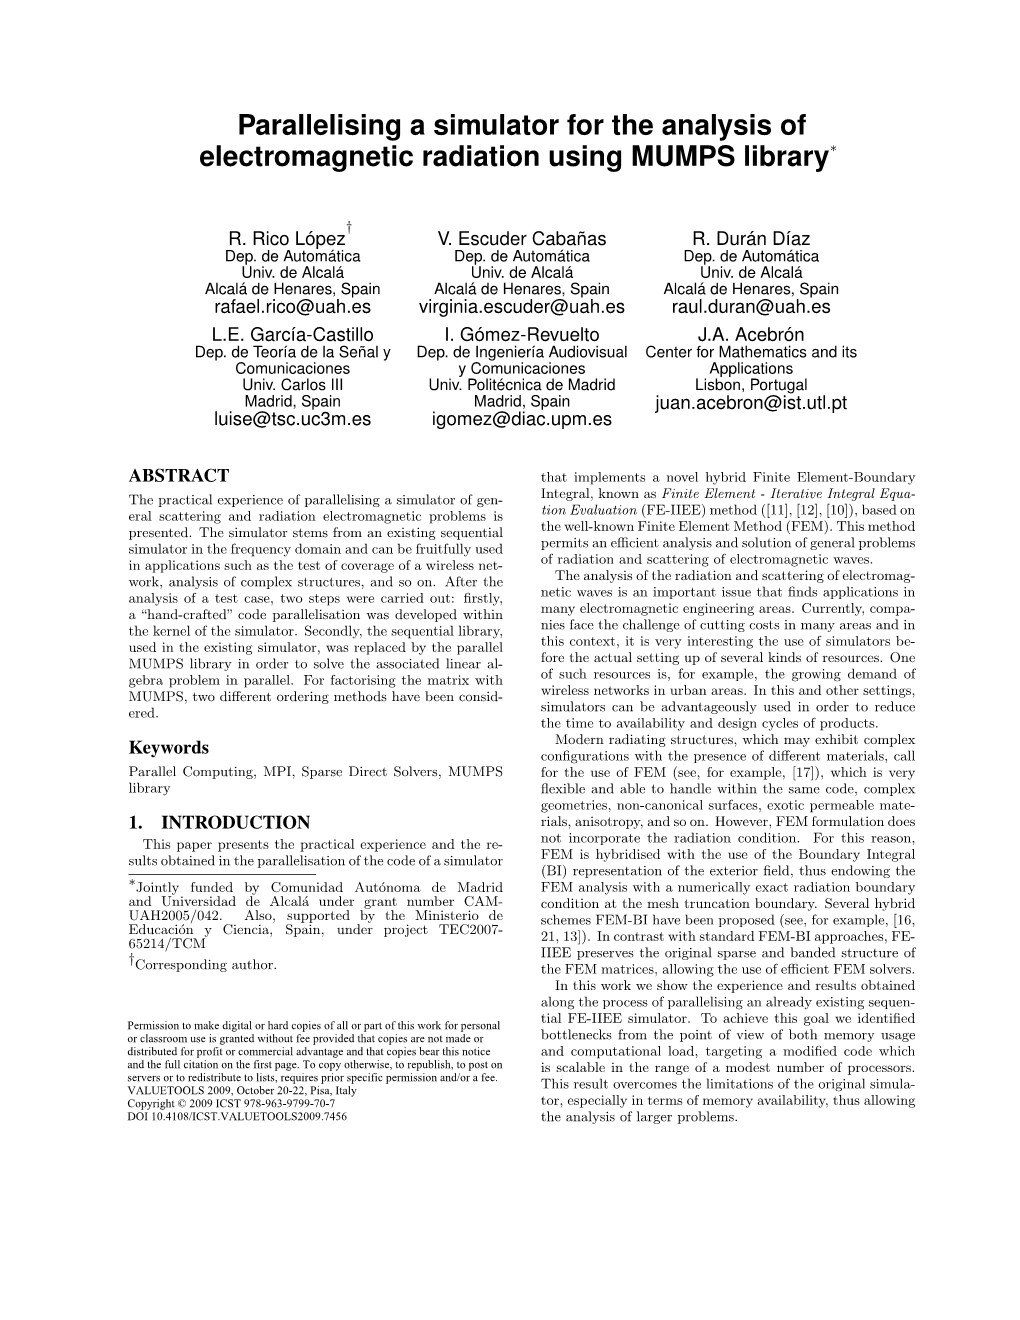 Parallelising a Simulator for the Analysis of Electromagnetic Radiation Using MUMPS Library∗